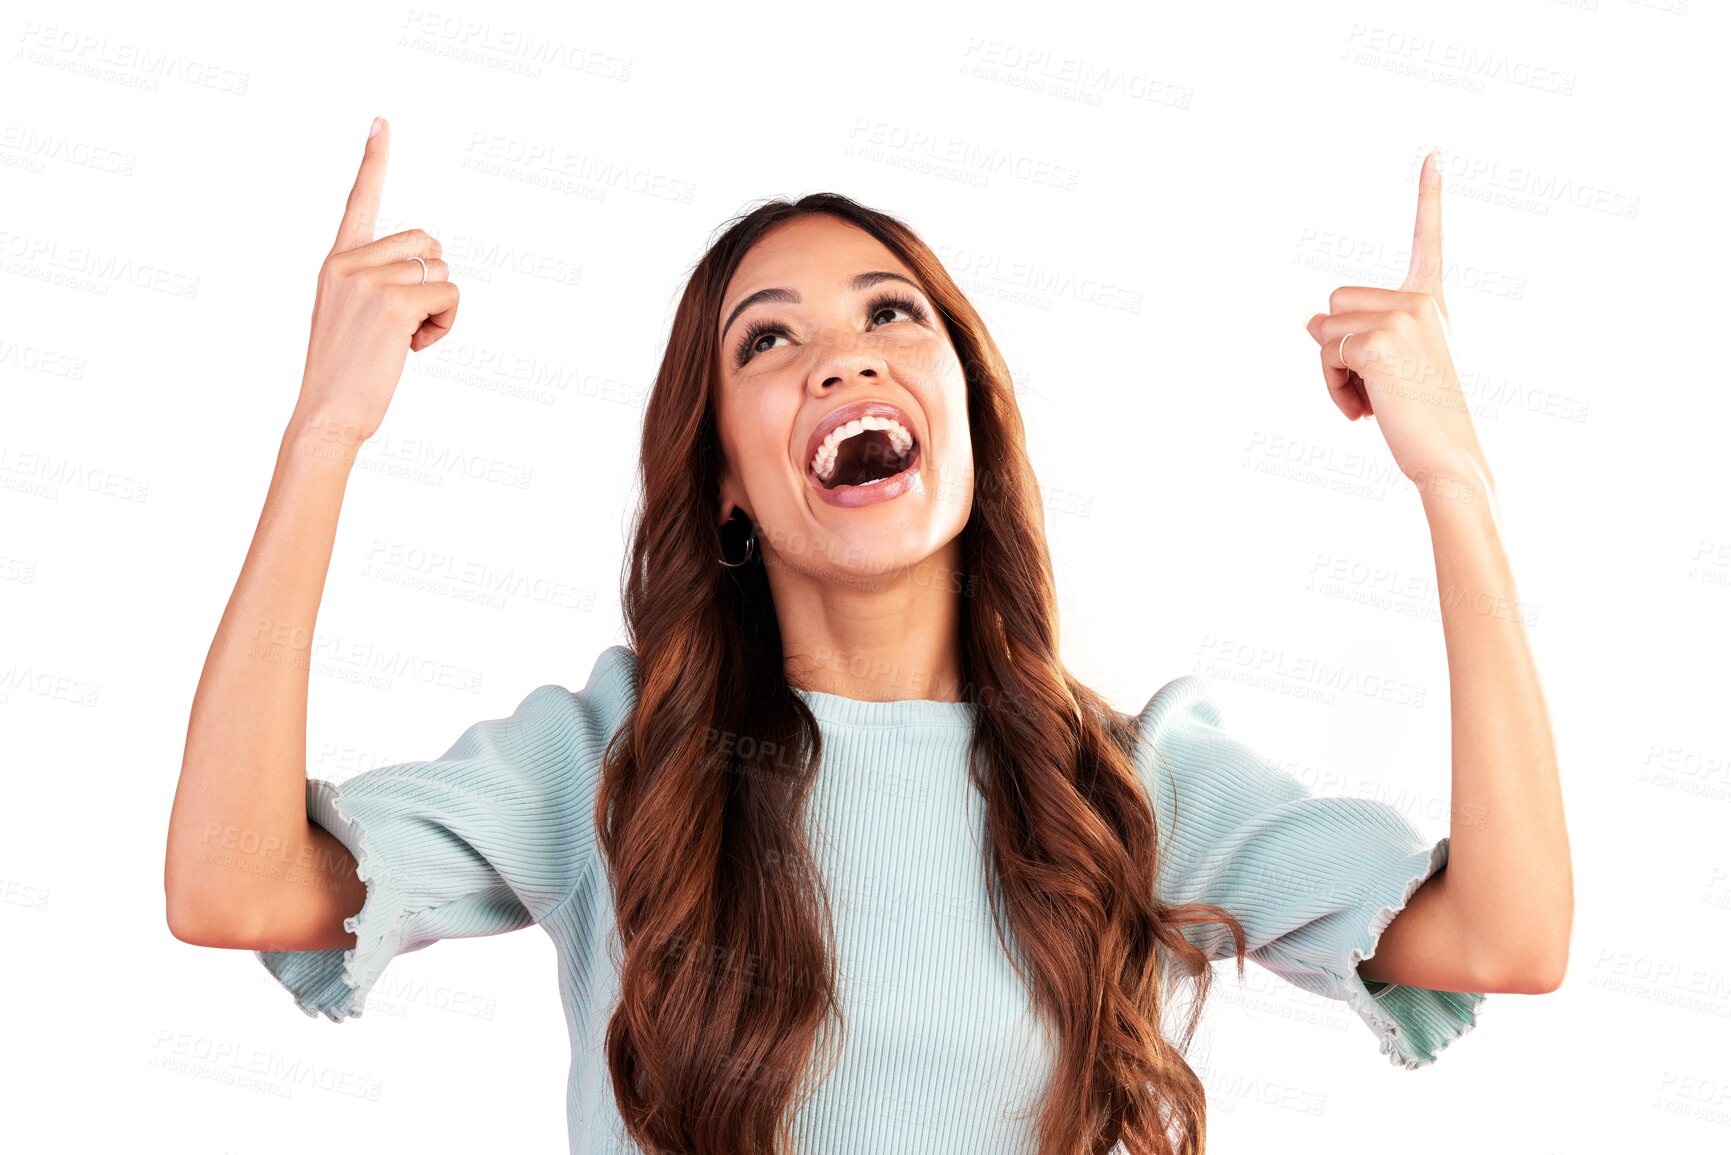 Buy stock photo Smile, pointing up or woman excited by a sale, deal or discount isolated on transparent png background. Advertising, happy or person showing product placement, promotion offer or retail announcement